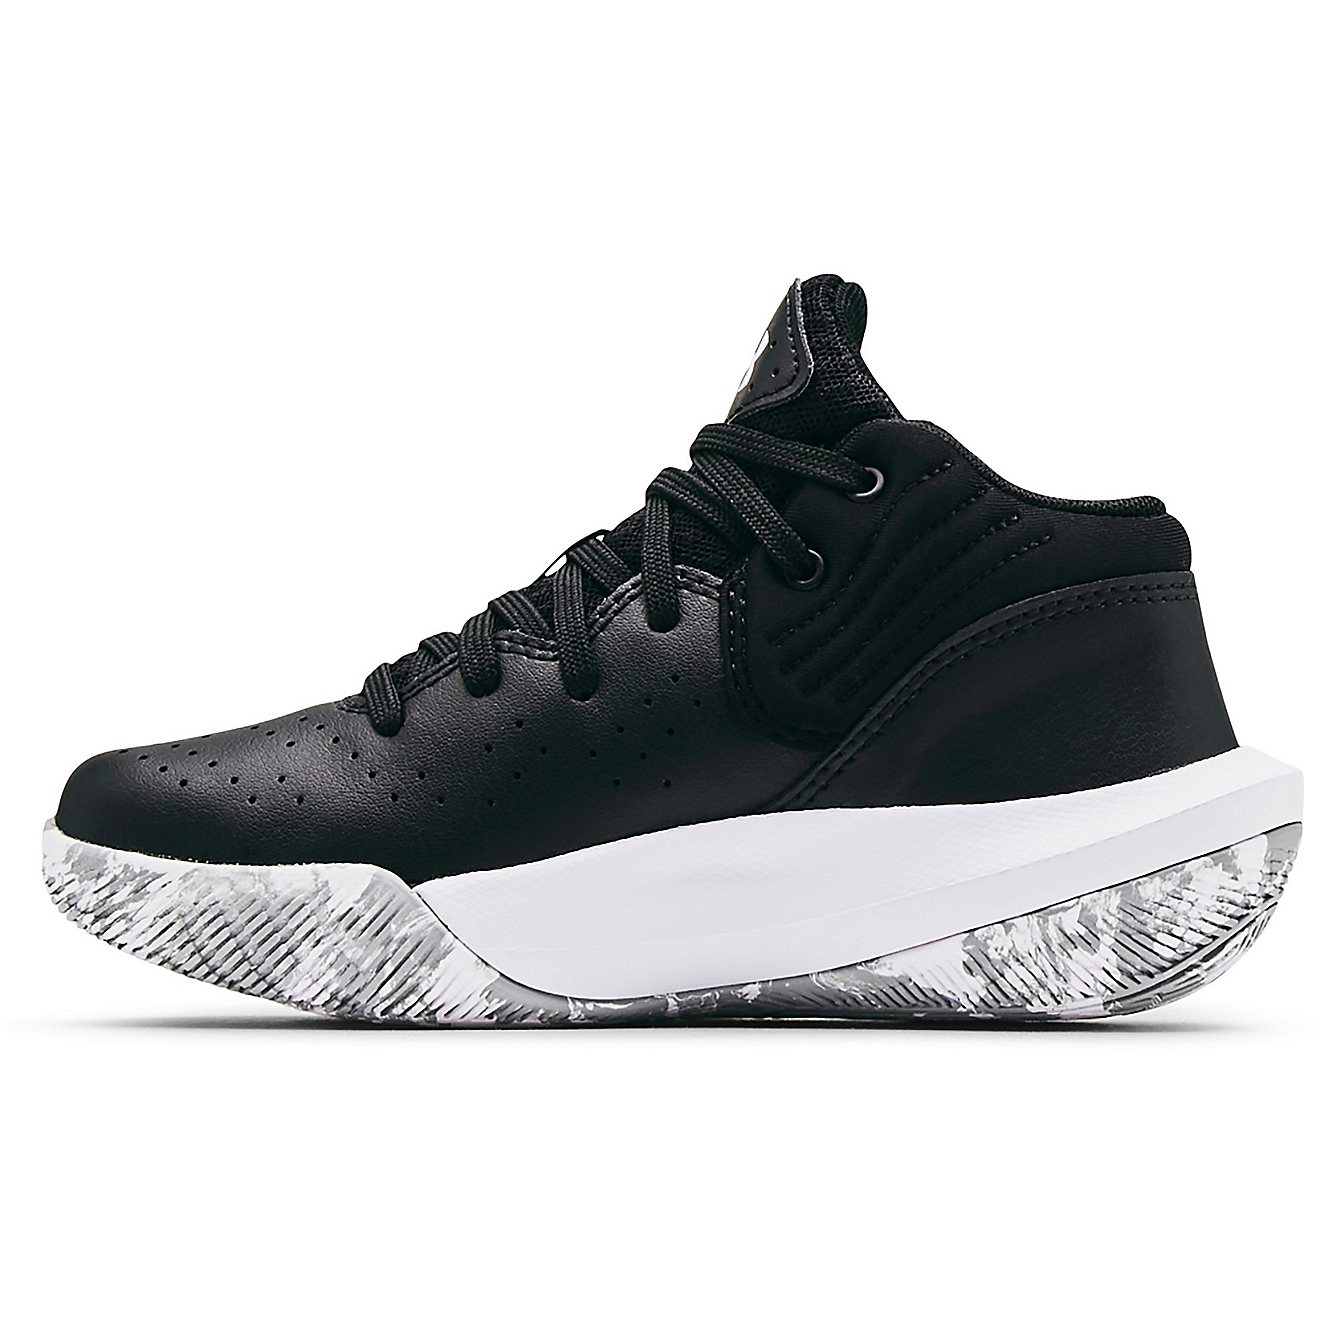 Under Armour Kids' Jet '21 Basketball Shoes                                                                                      - view number 2